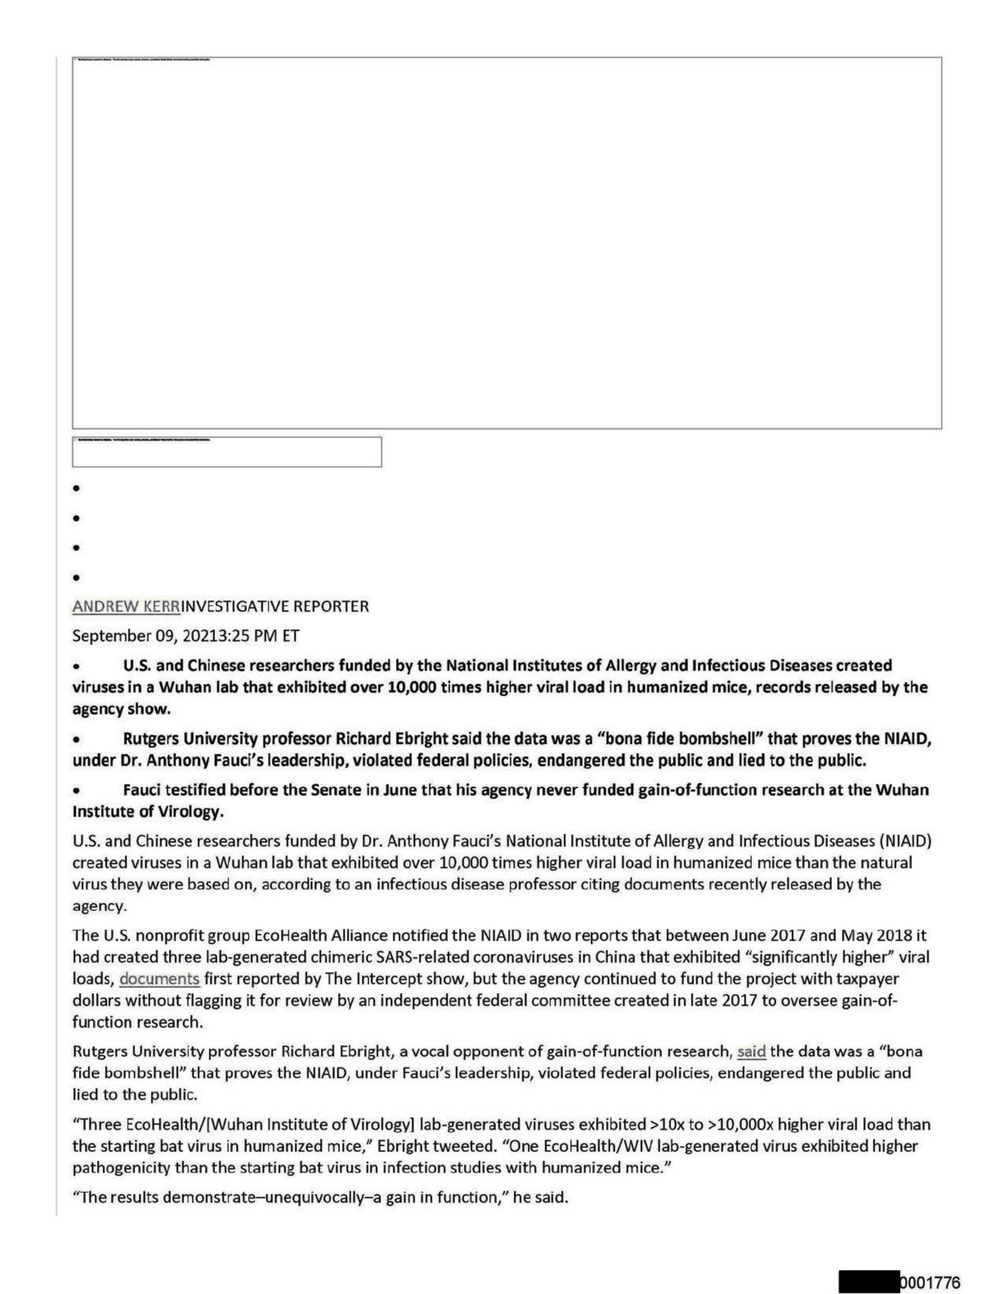 Page 3 from David Morens NIH Emails Redacted